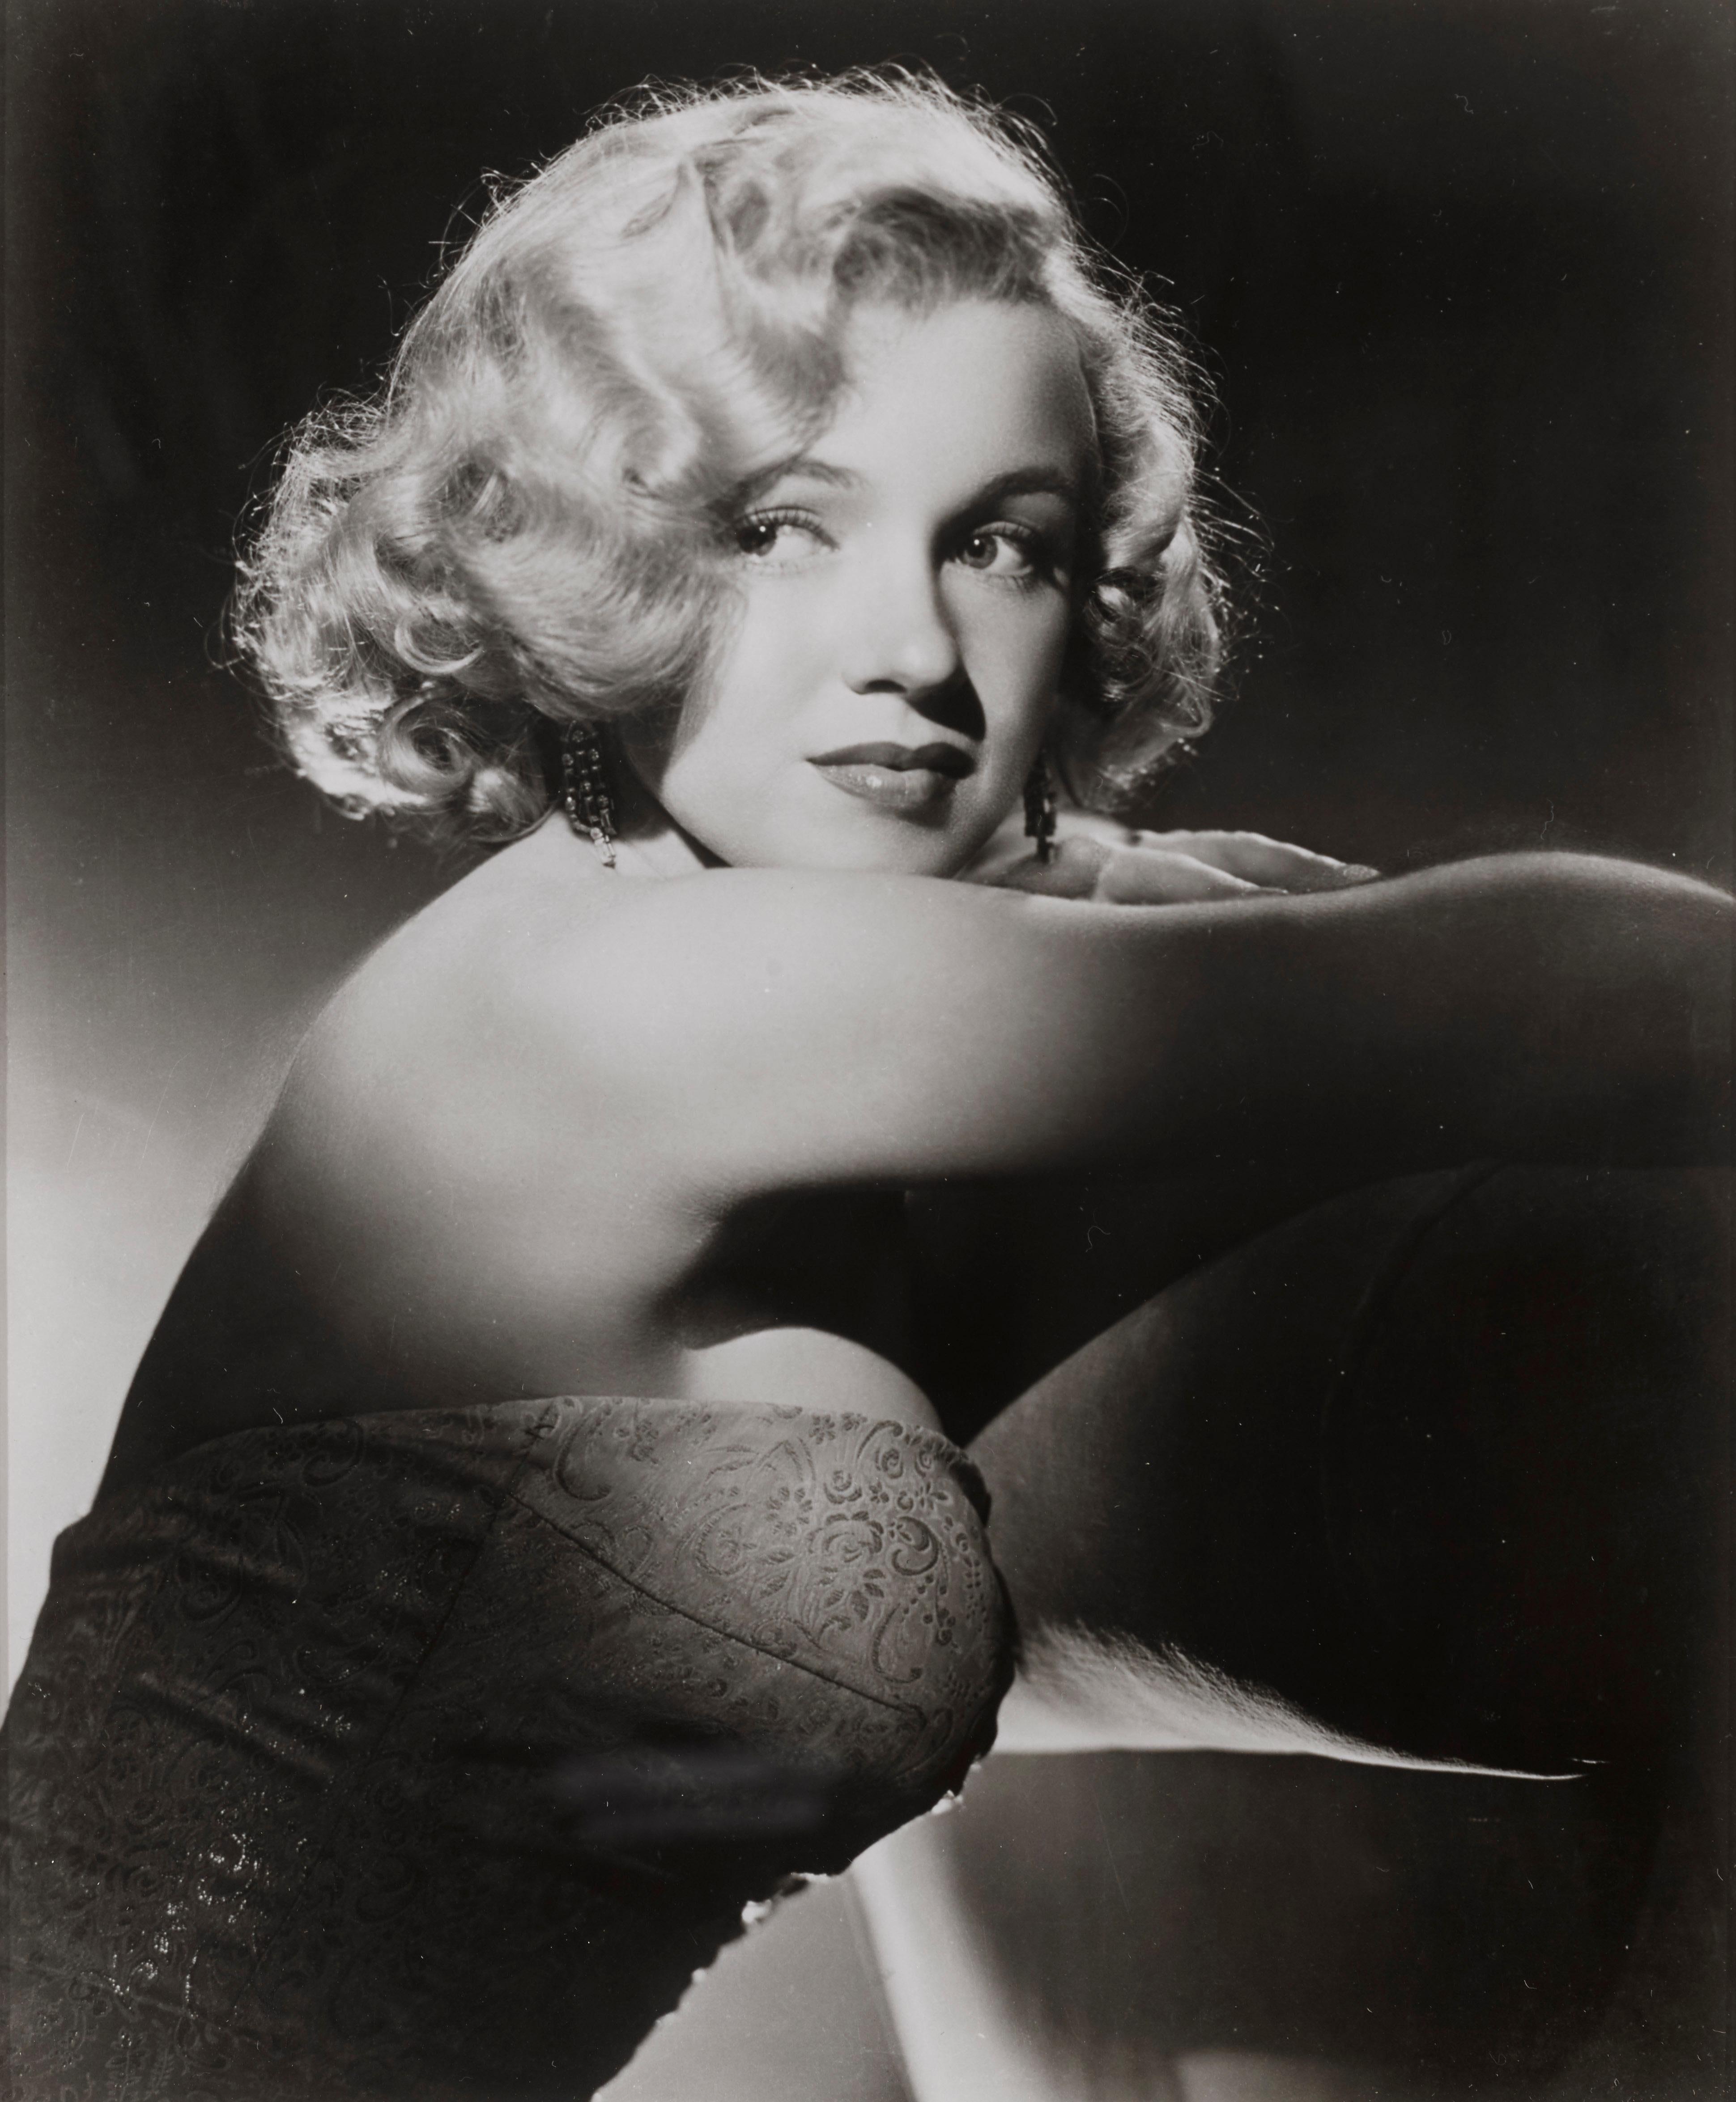 Original US 20th century Fox photographic production still used to promote the studio's star Marilyn Monroe in the early 1950s. This piece is conservation framed and would be shipped by Federal Express. The size given is before framing.